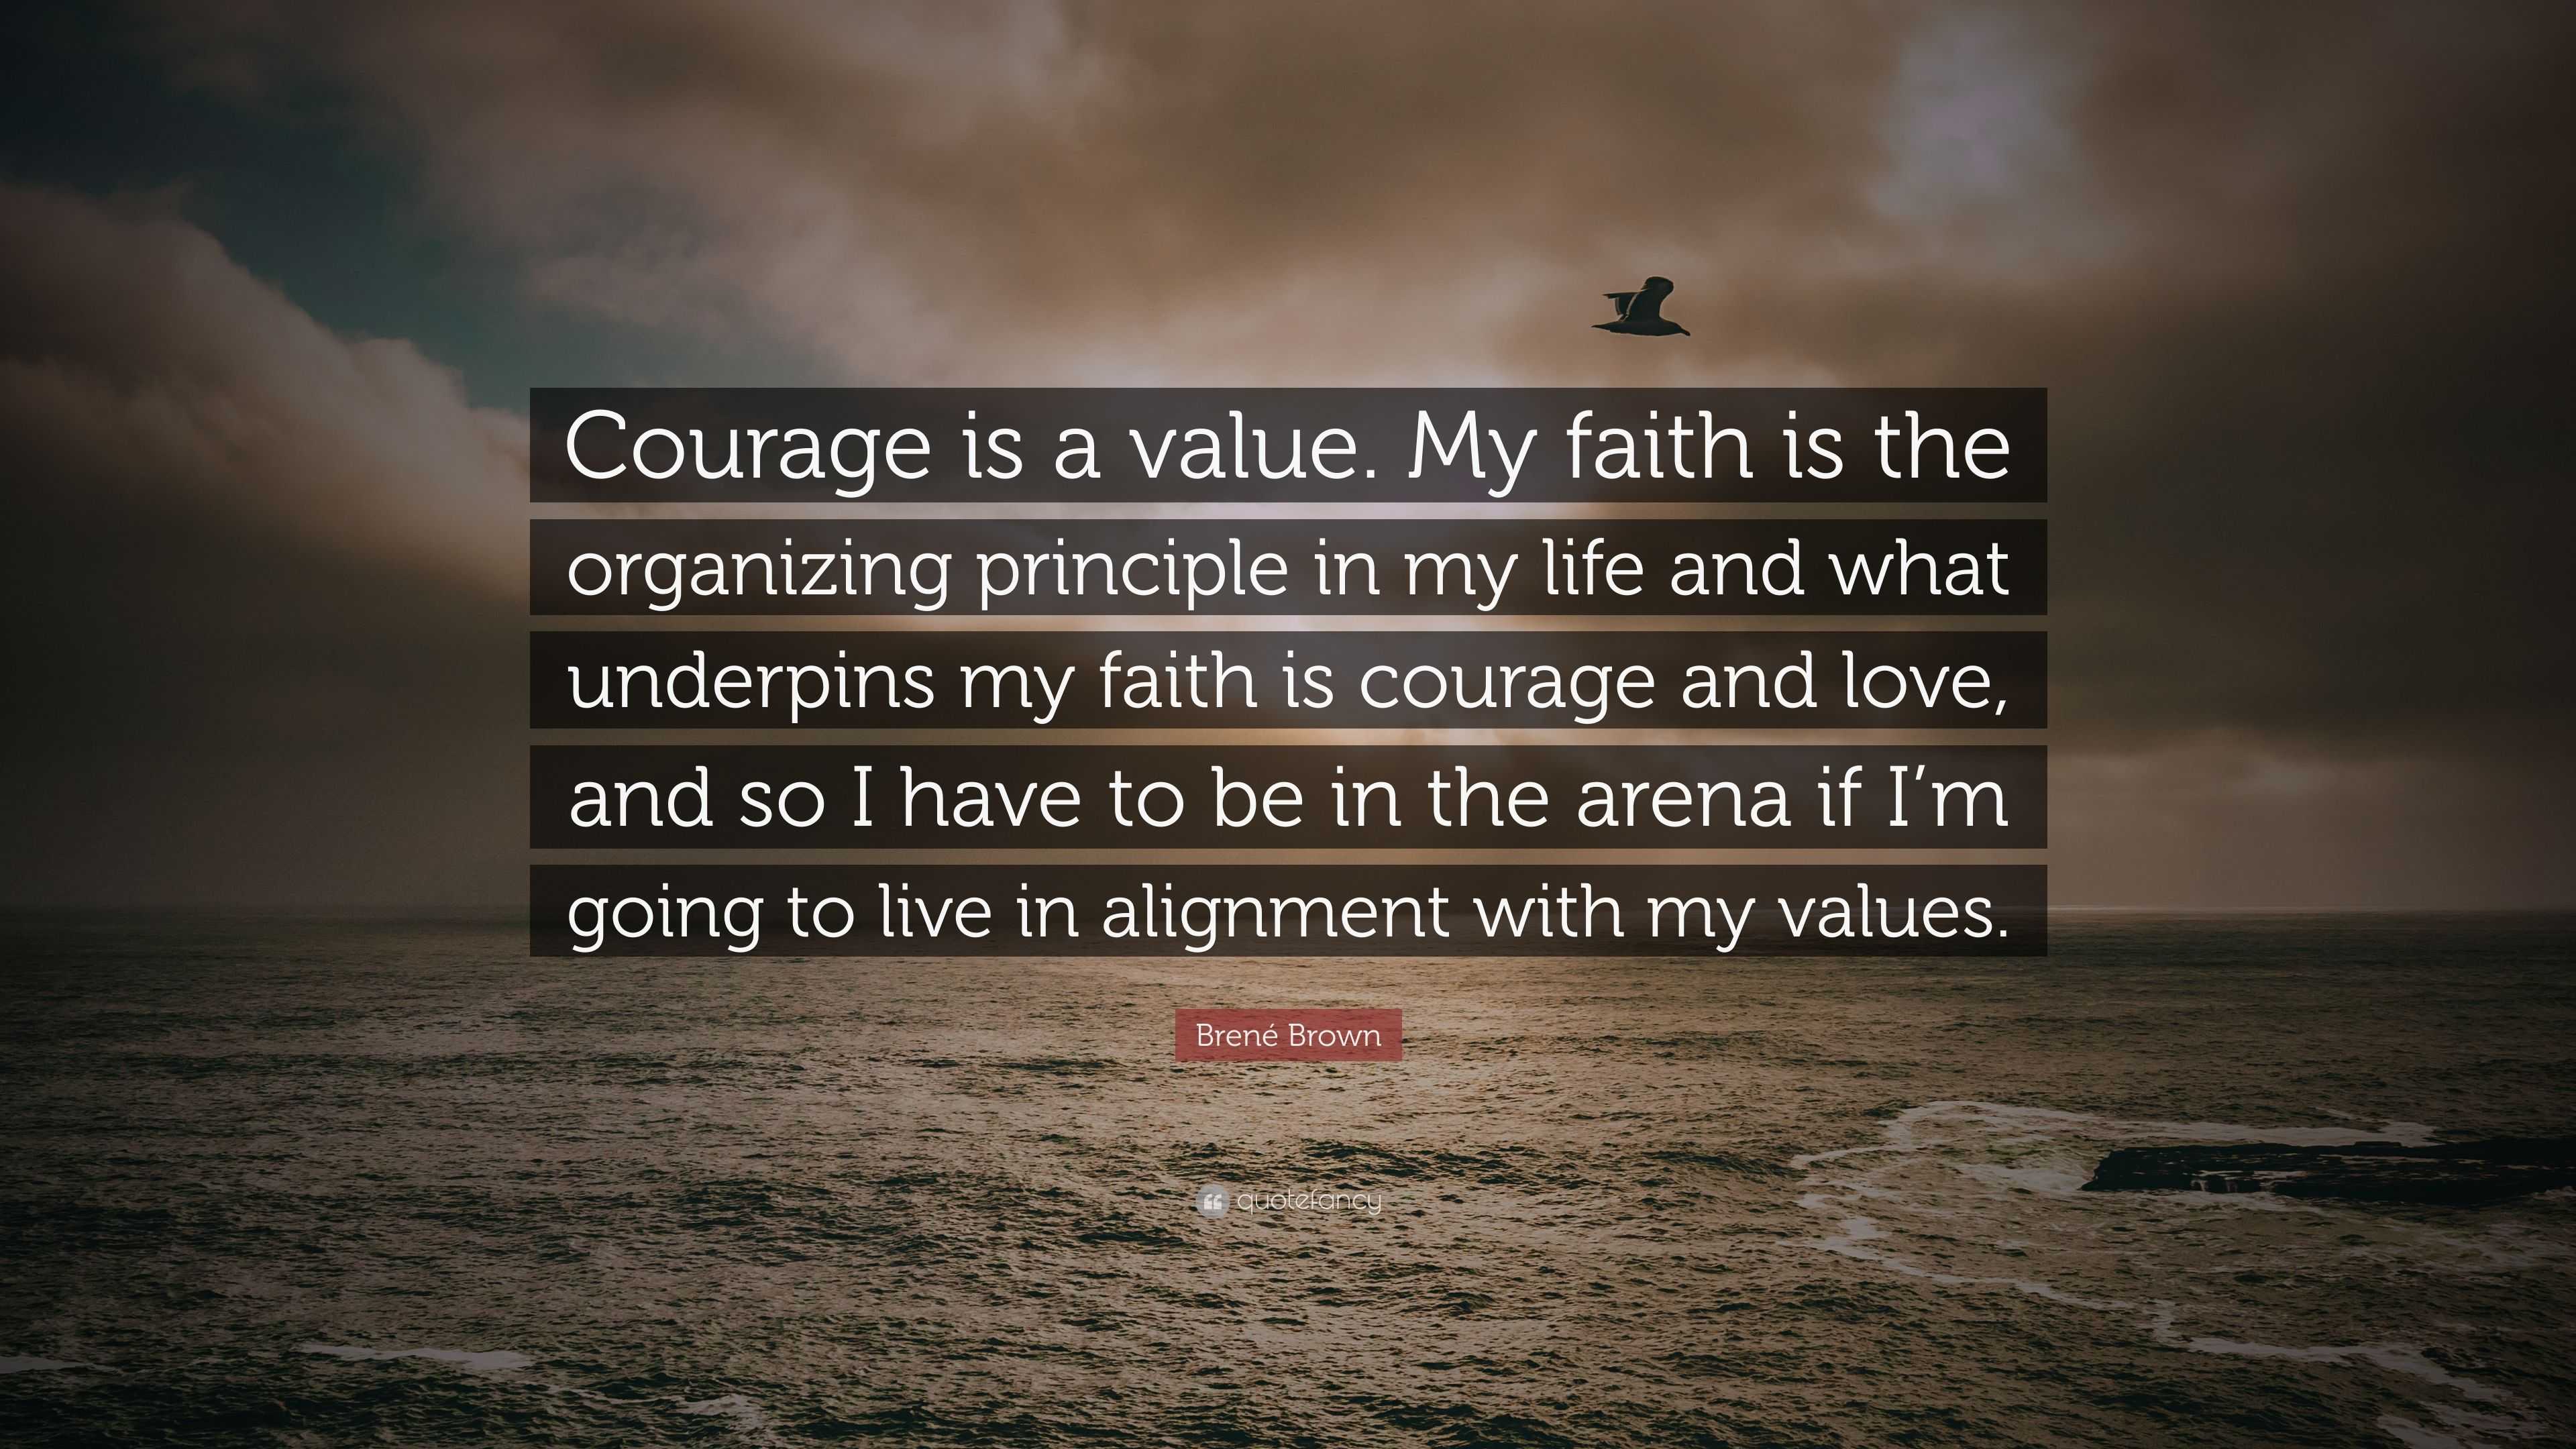 The Value of Courage by Spencer Johnson